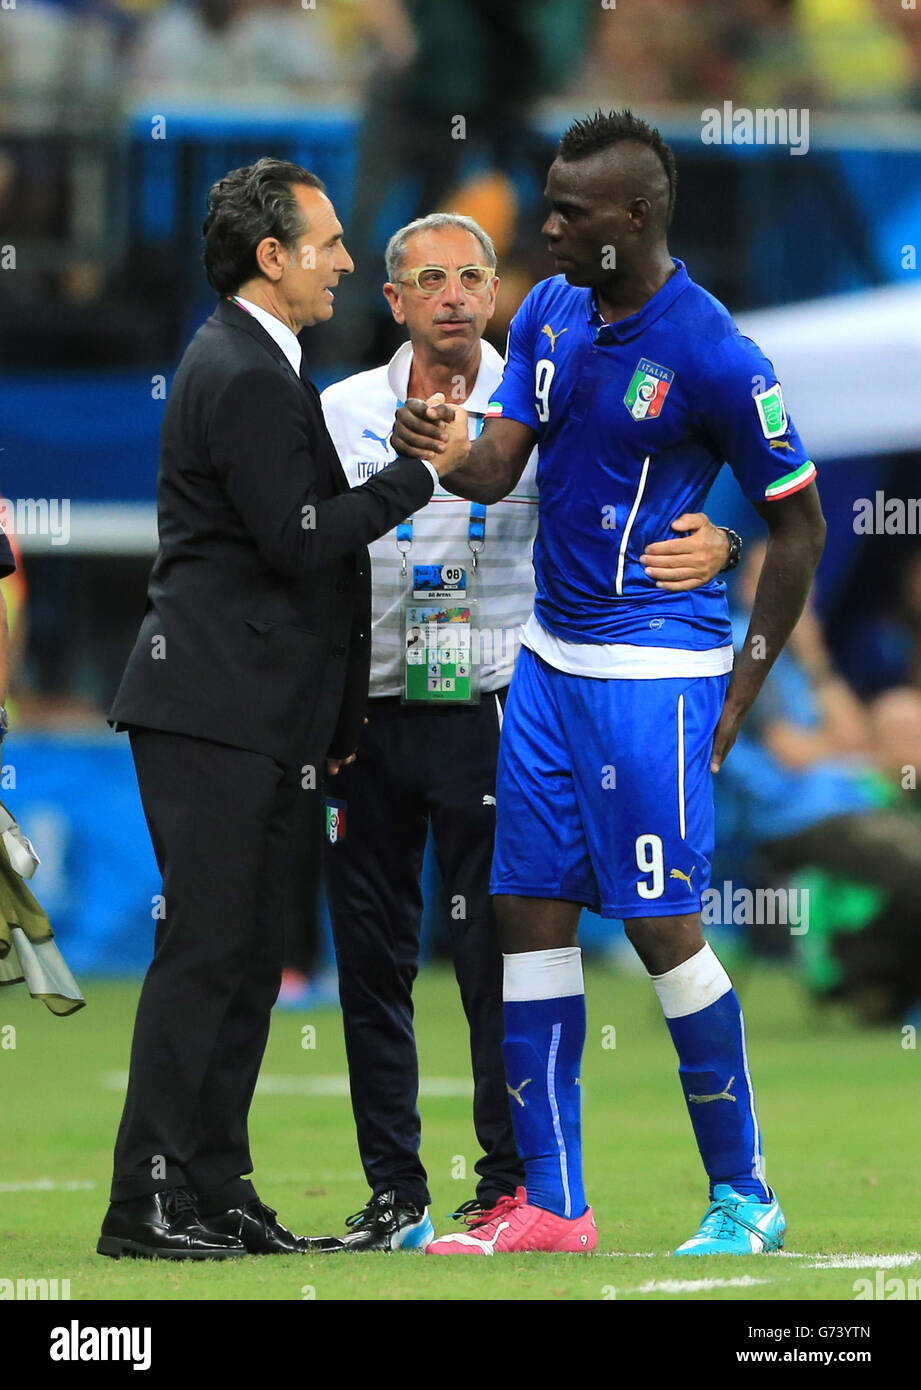 Italy's Mario Balotelli (right) is congratulated by manager Cesare Prandelli (left) during the FIFA World Cup, Group D match at the Arena da Amazonia, Manaus, Brazil. Stock Photo